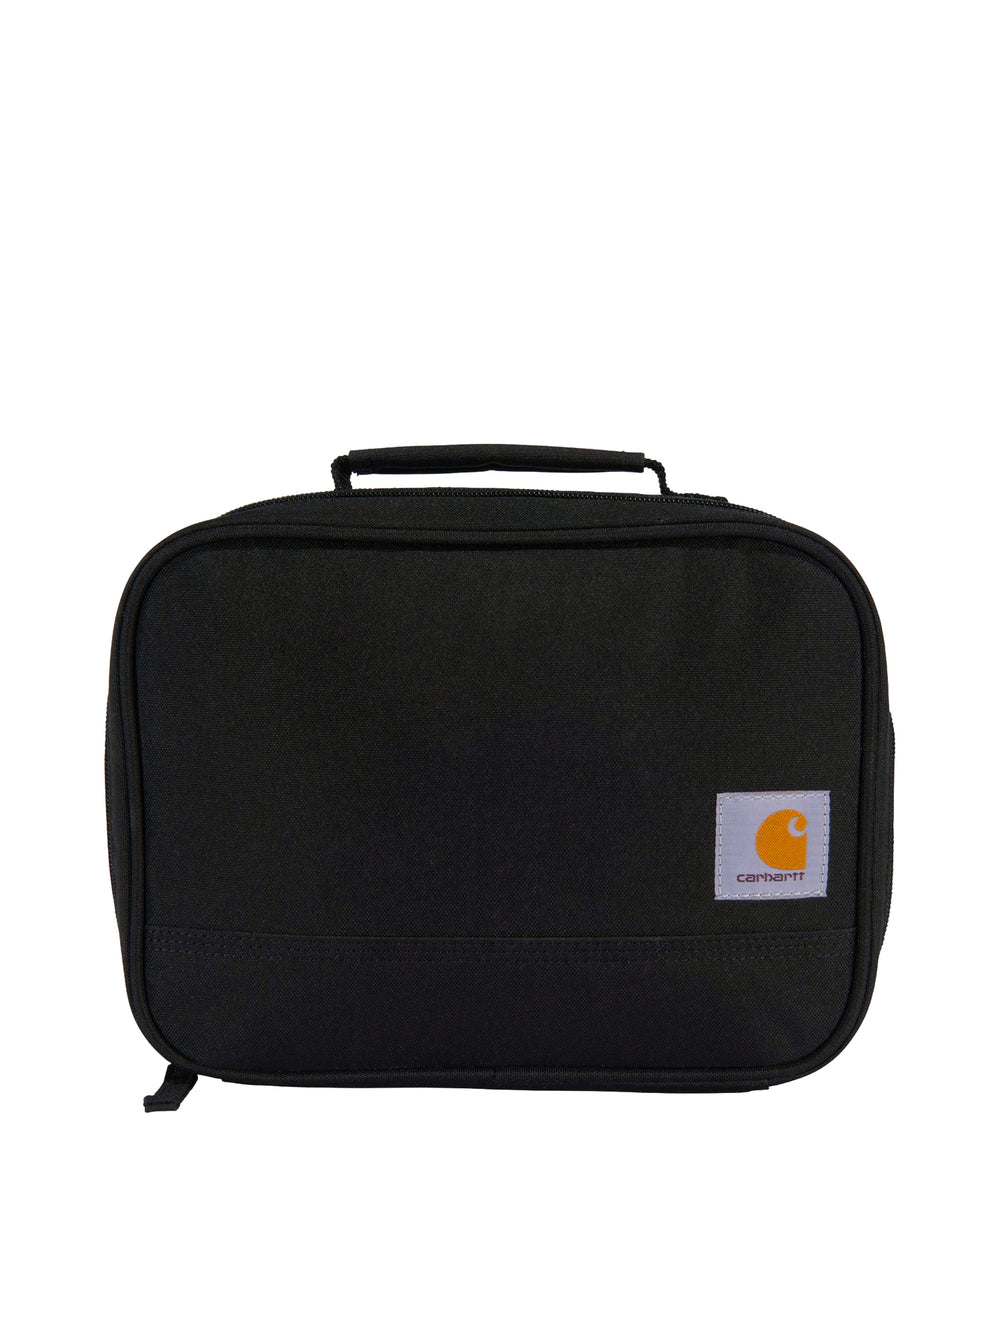 CARHARTT INSULATED 4CAN LUNCH COOLER